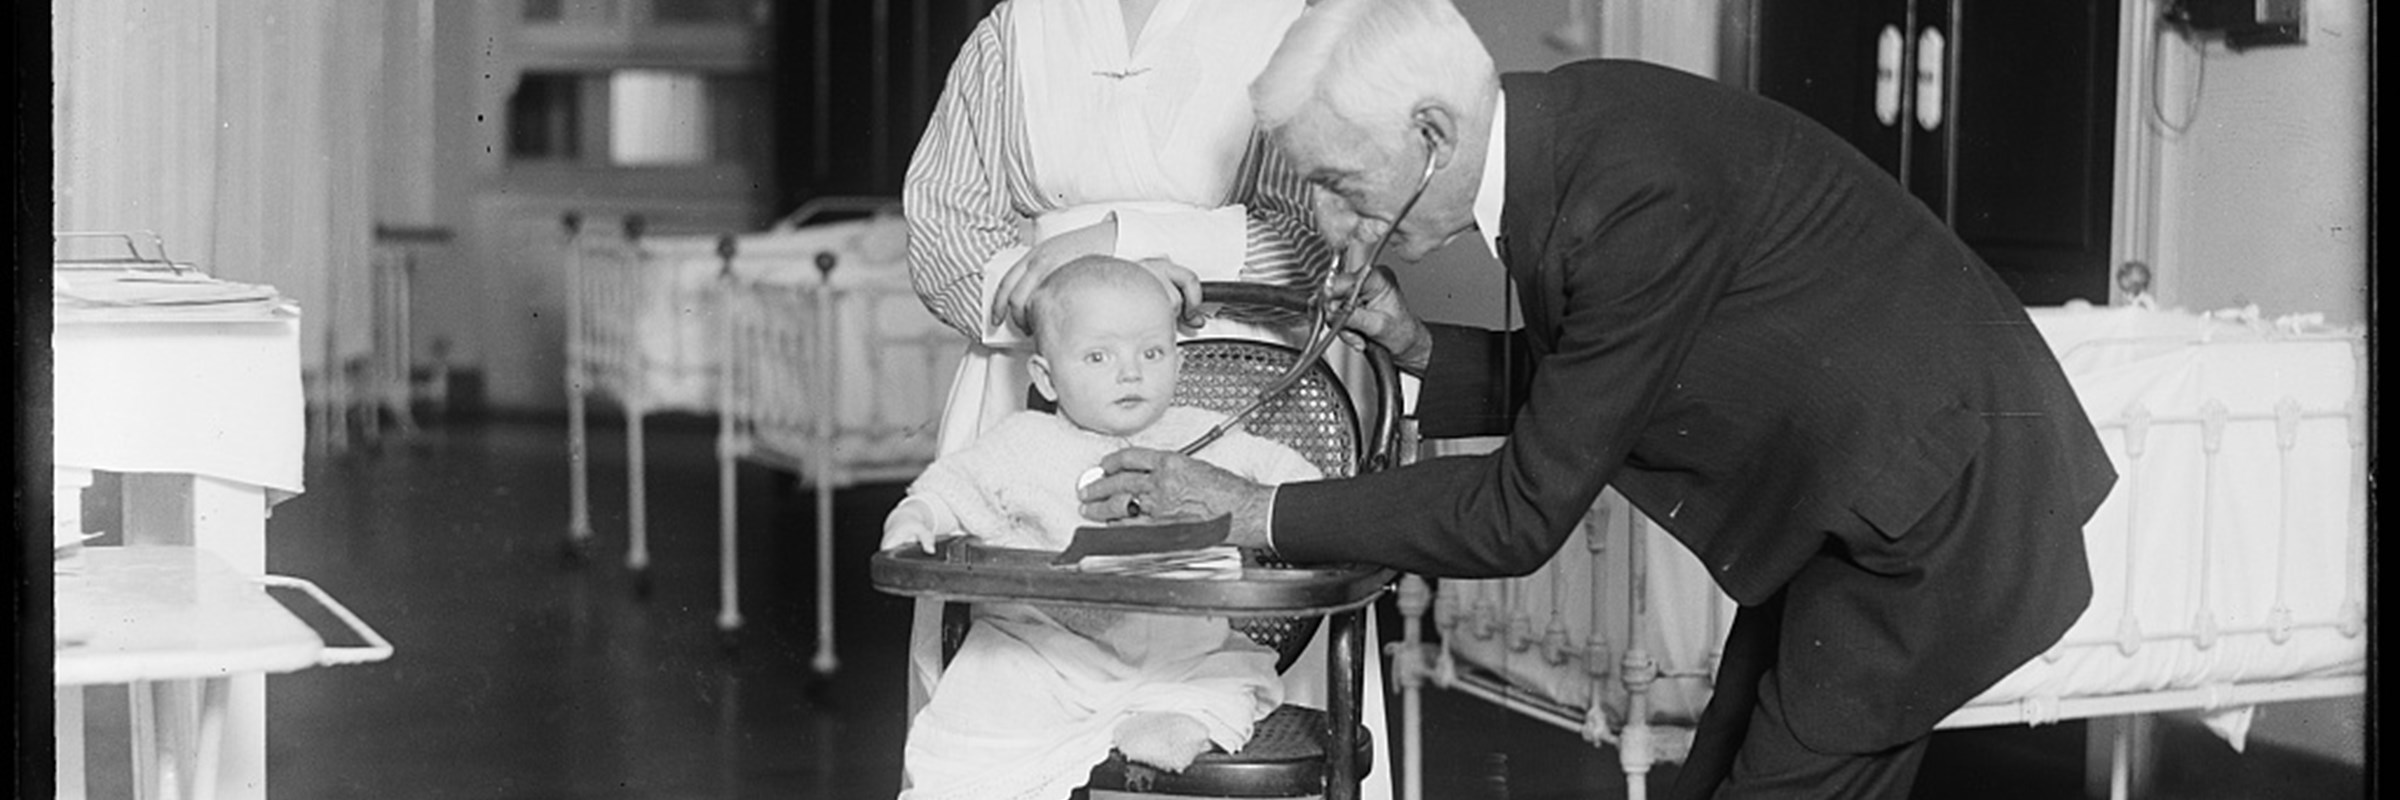 Kids & Germs: Child Health Reform in the Early 20th Century